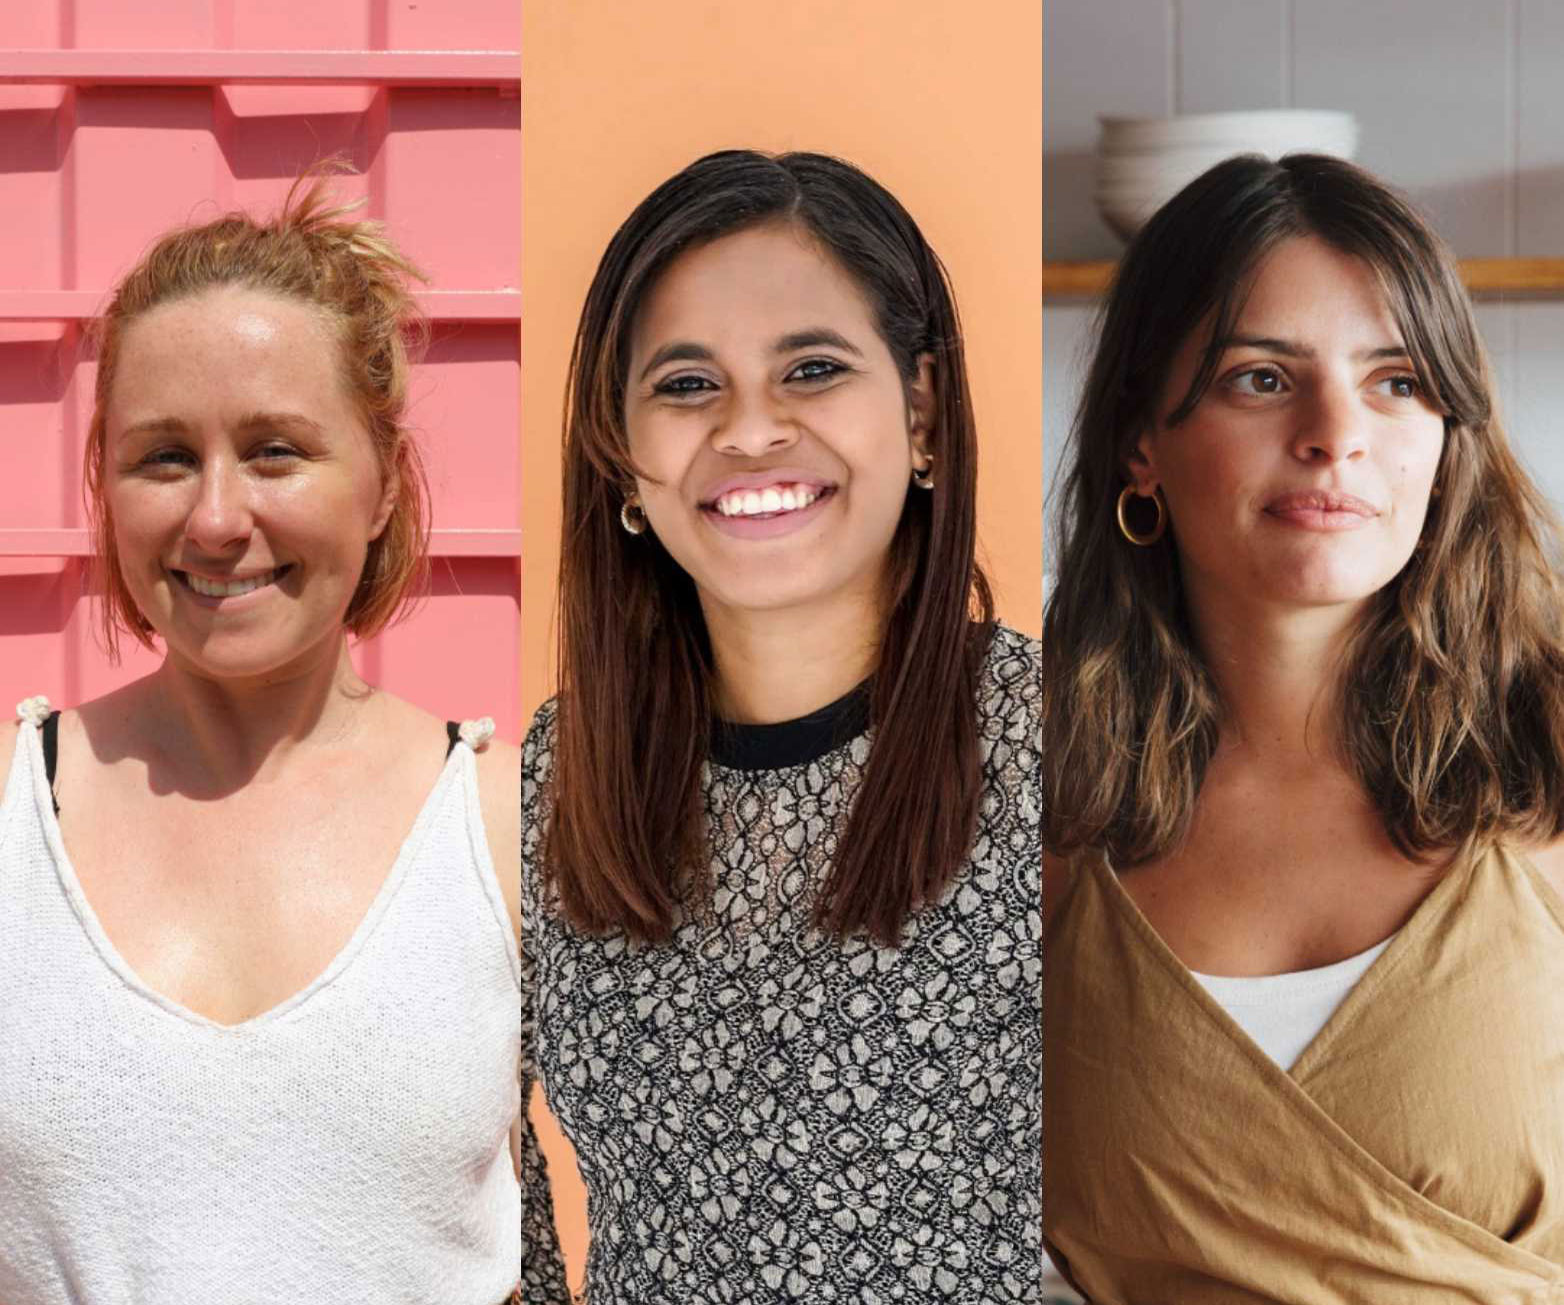 Climate change solutions and supporting domestic violence survivors: Meet the incredible finalists from the 2020 Women of the Future Awards